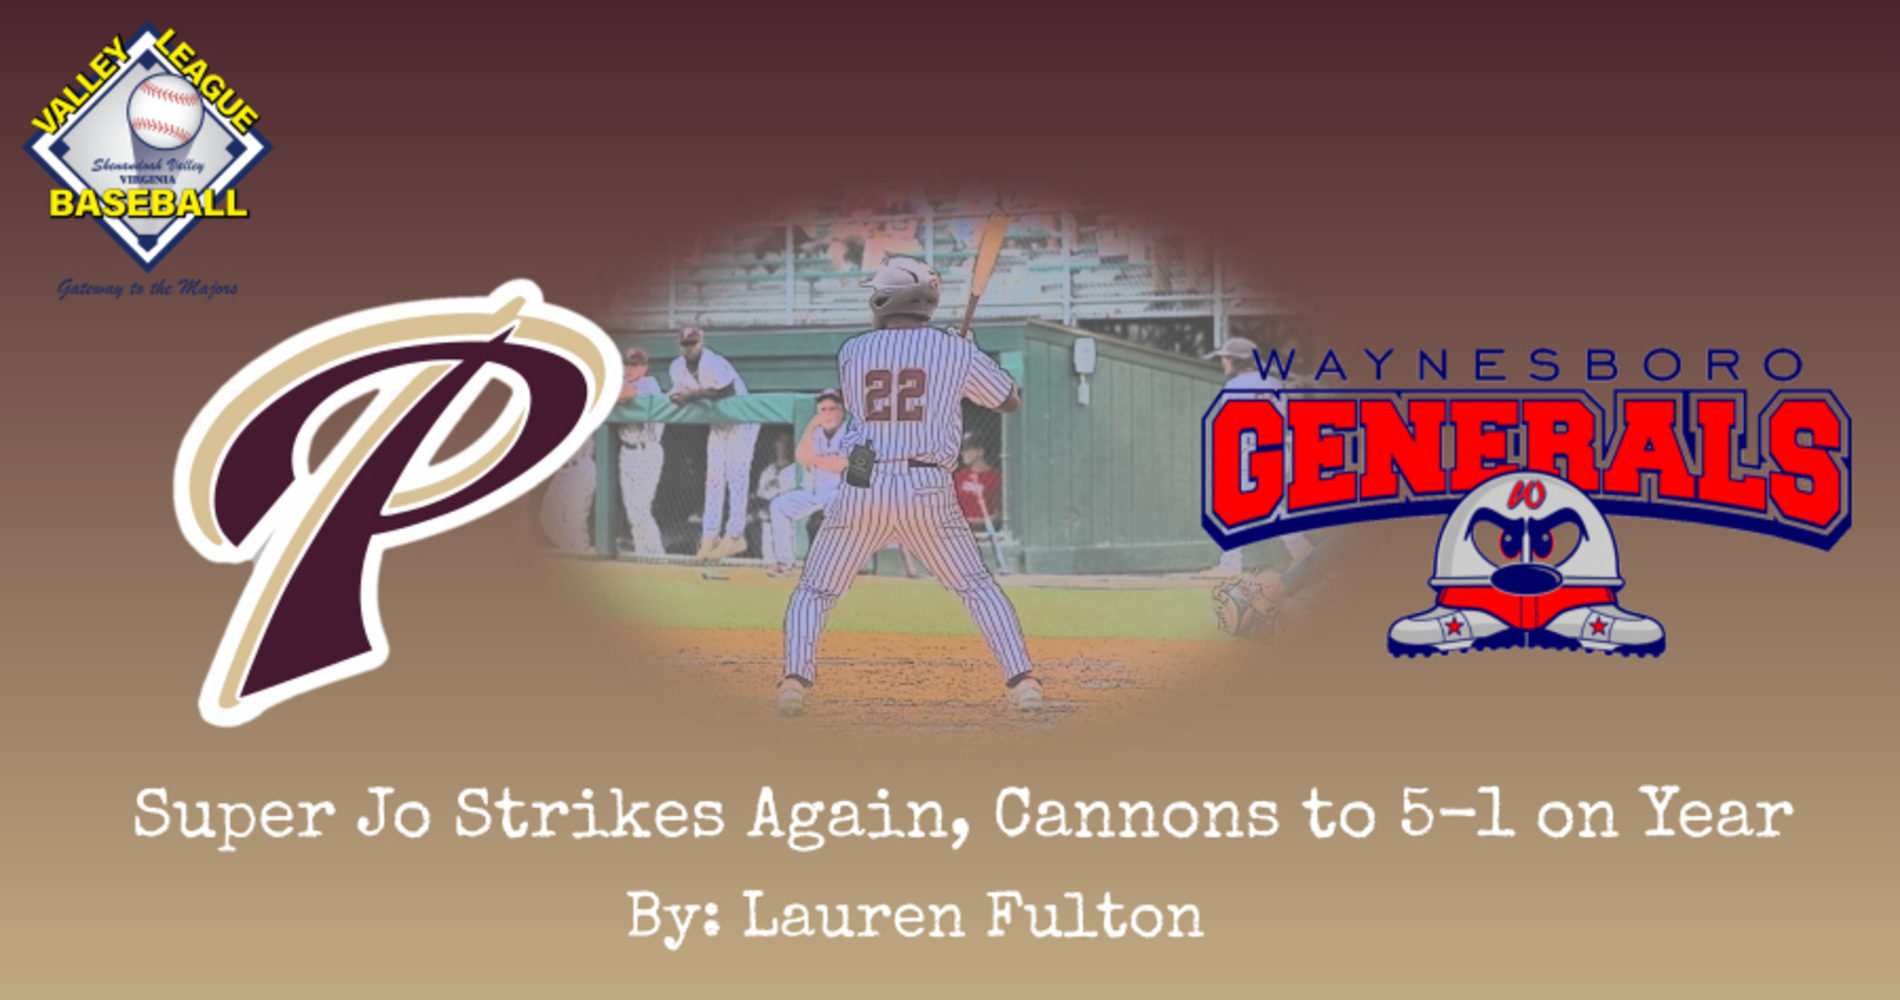 “Super Jo” Strikes Again as Cannons outlast Generals in 10 innings